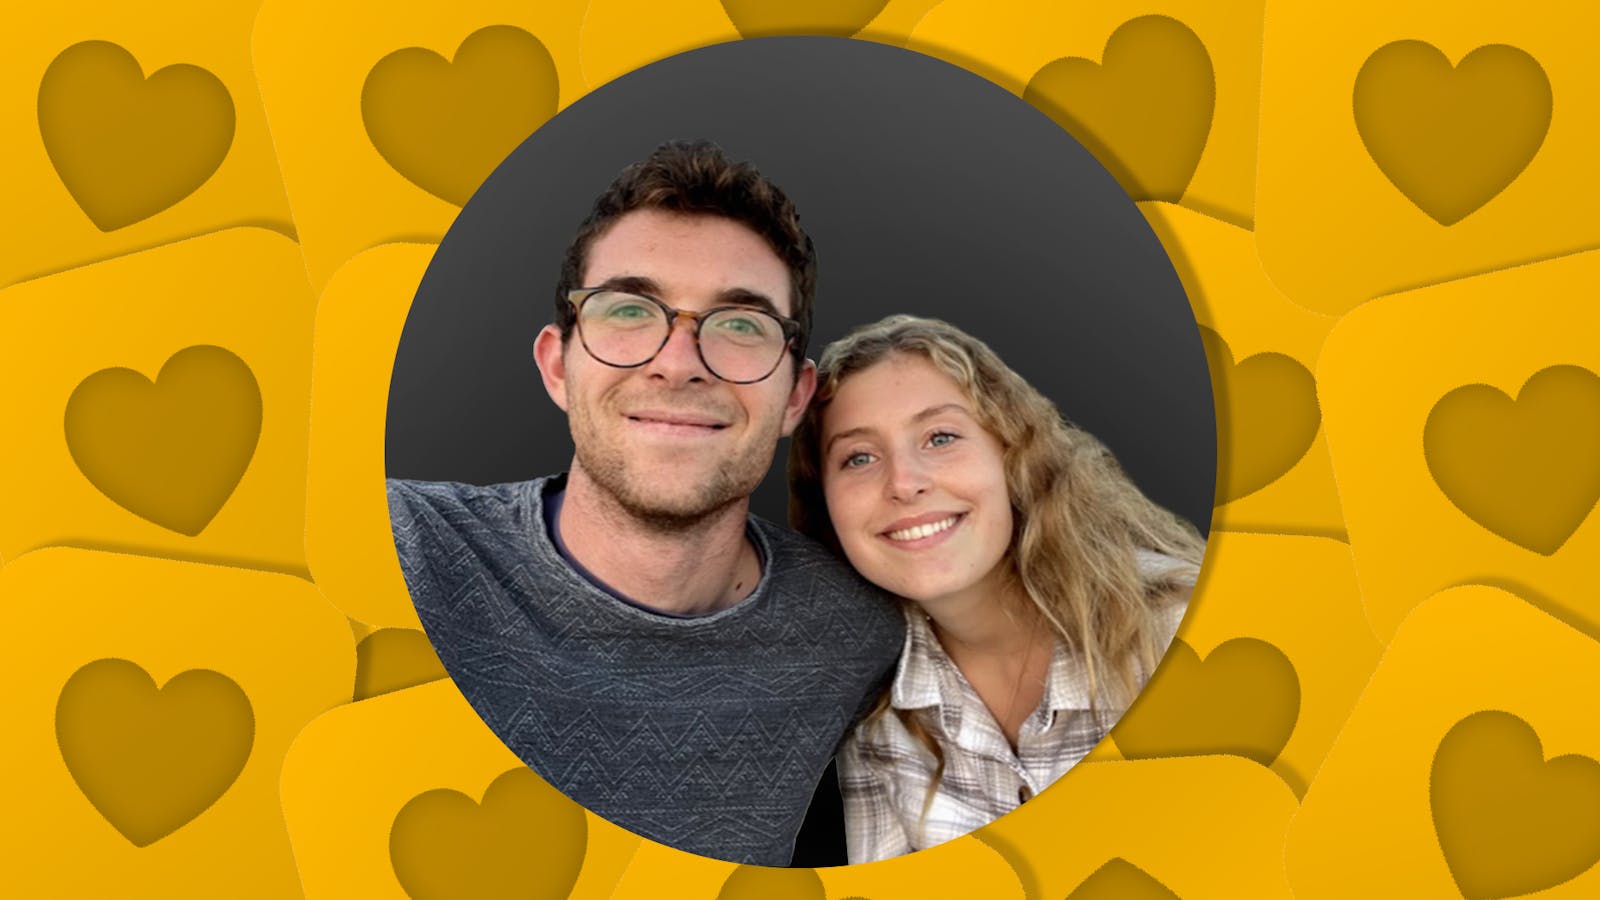 Locket founder Matt Moss and his girlfriend Ava Thompson, who he says inspired the app. Photo from Locket.